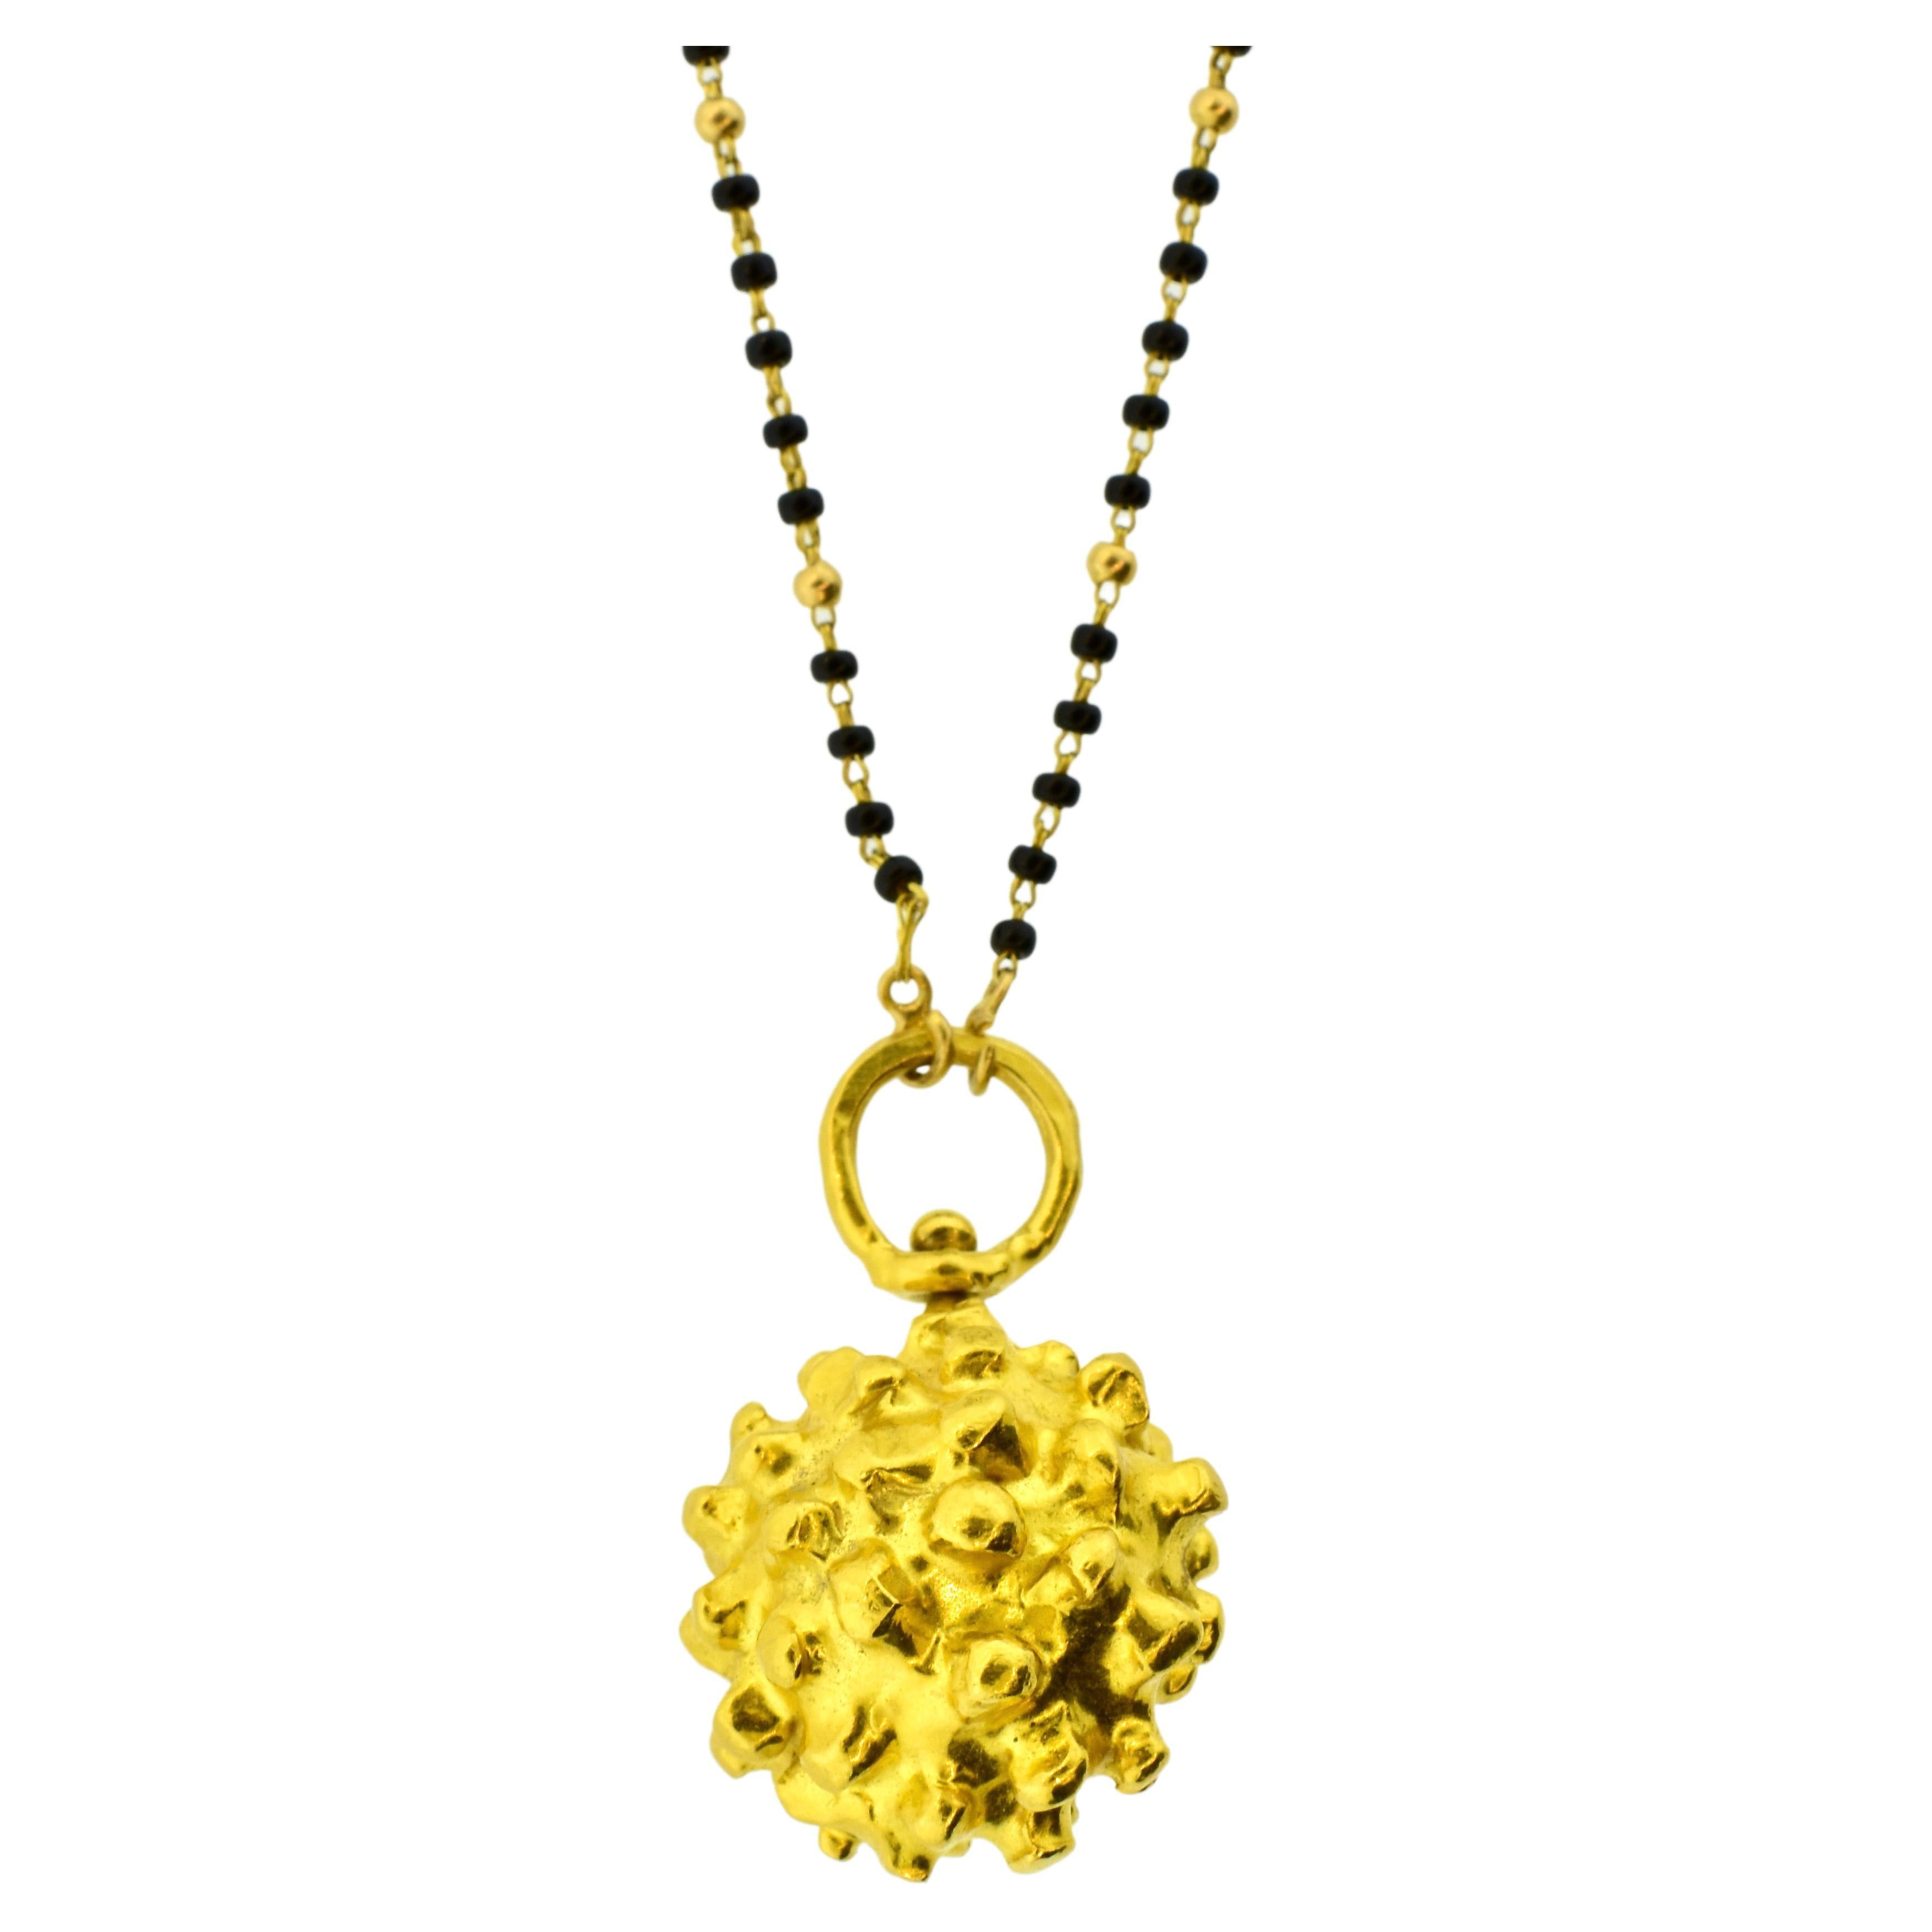 Jean Mahie Etruscan Ball Pendant in 22K Gold, French, c. 1990 For Sale